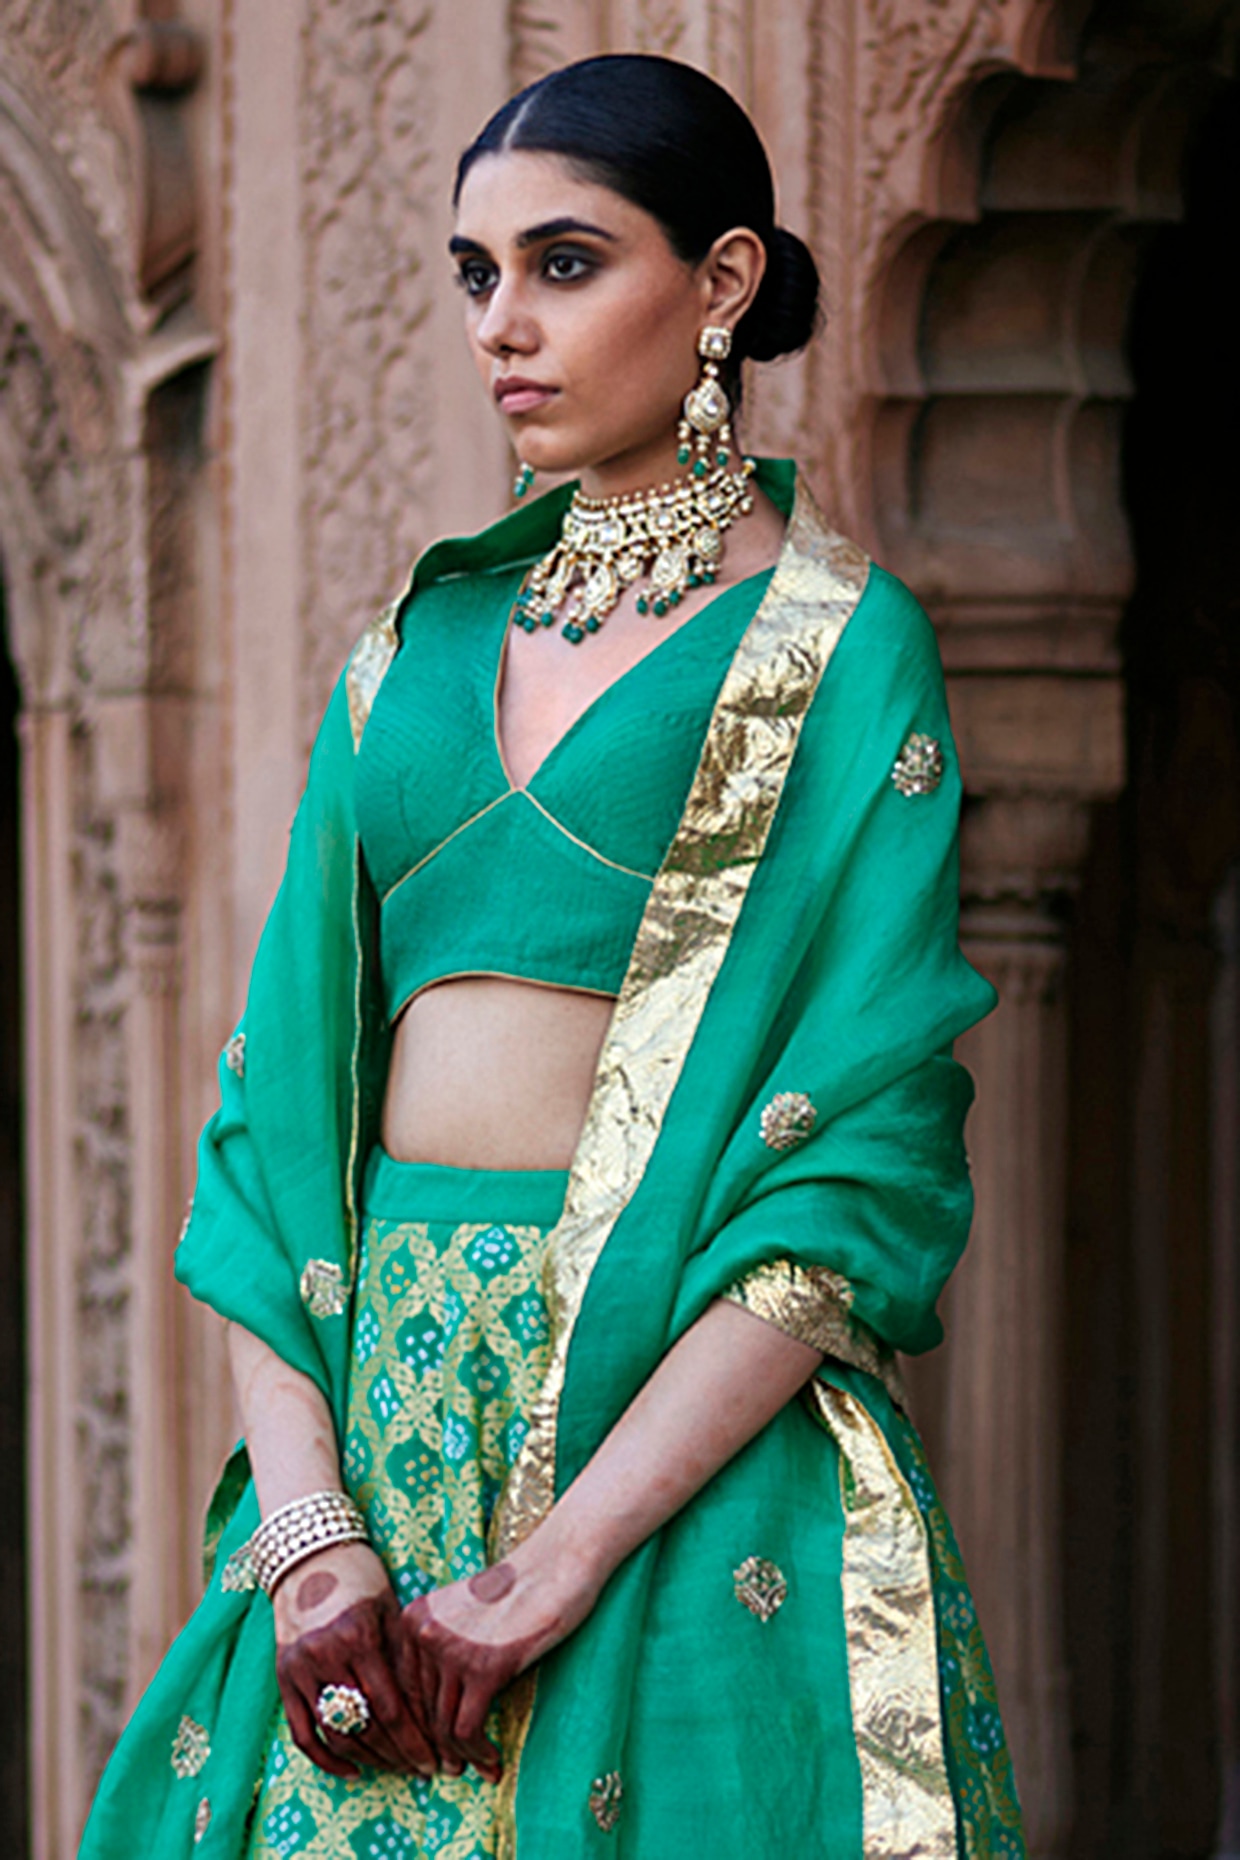 The Prettiest Lime Green Lehengas We Spotted On Brides! | WedMeGood